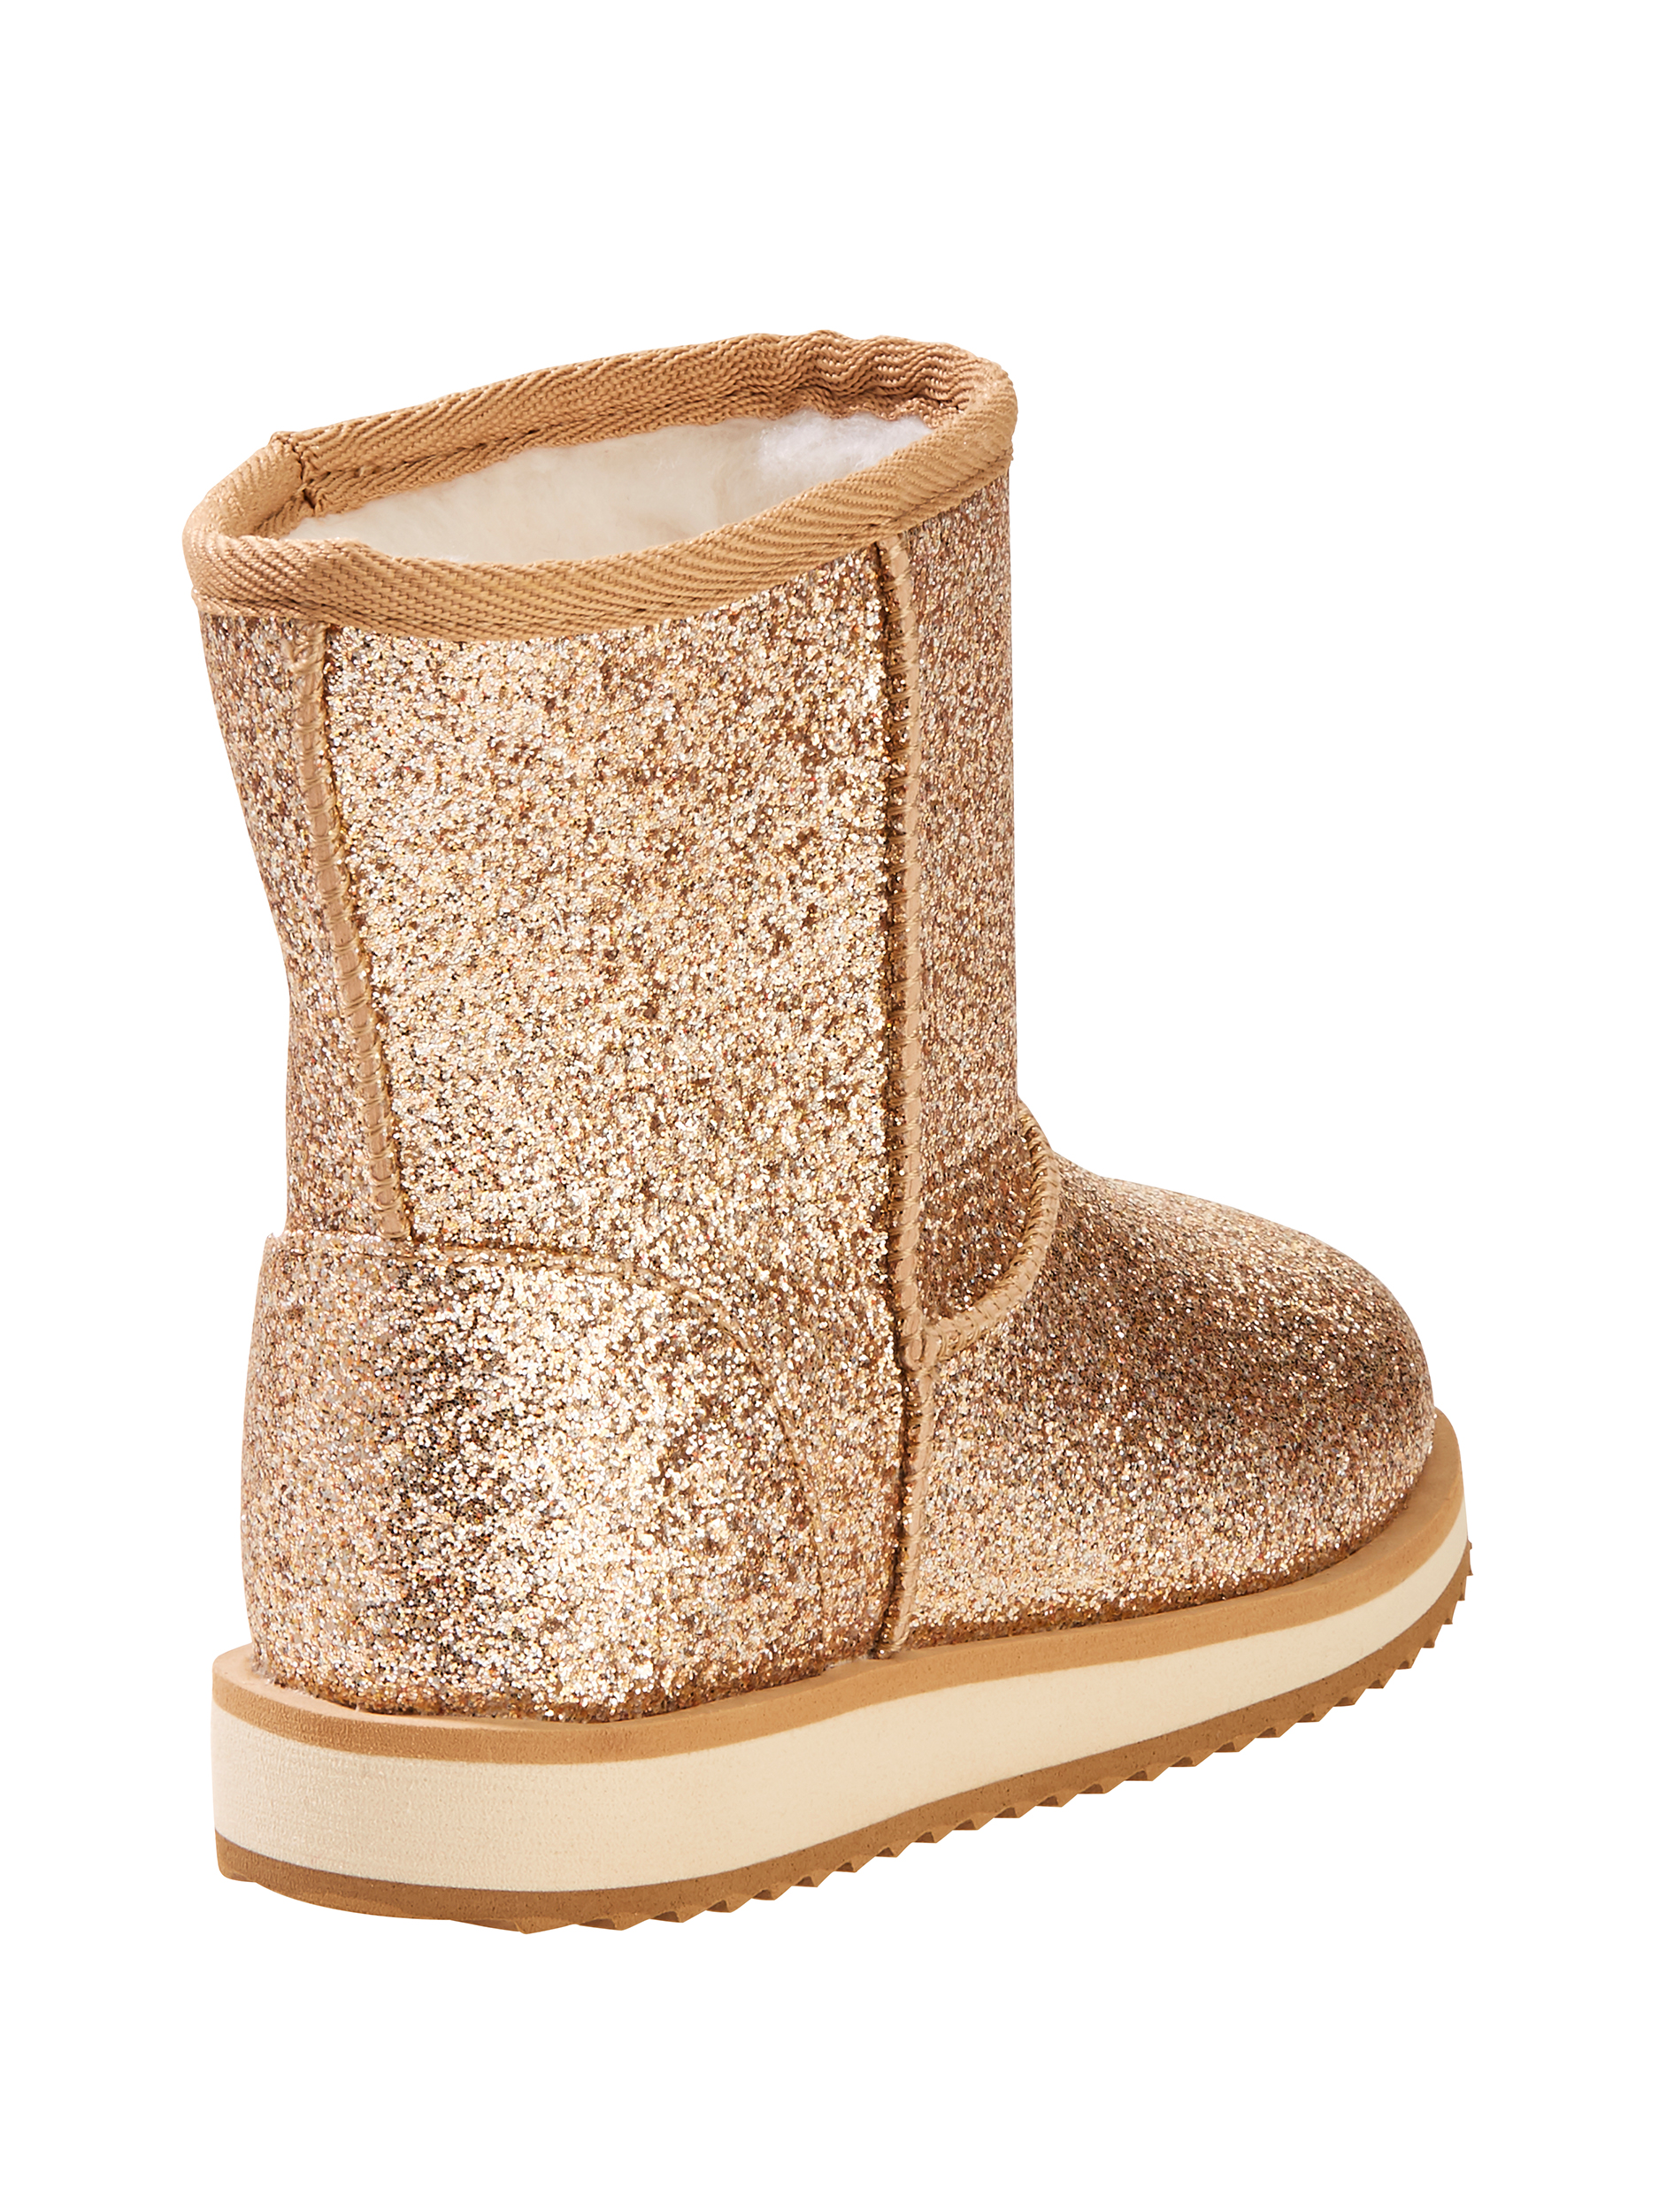 Wonder Nation Girls Faux Shearling Boots - image 3 of 6